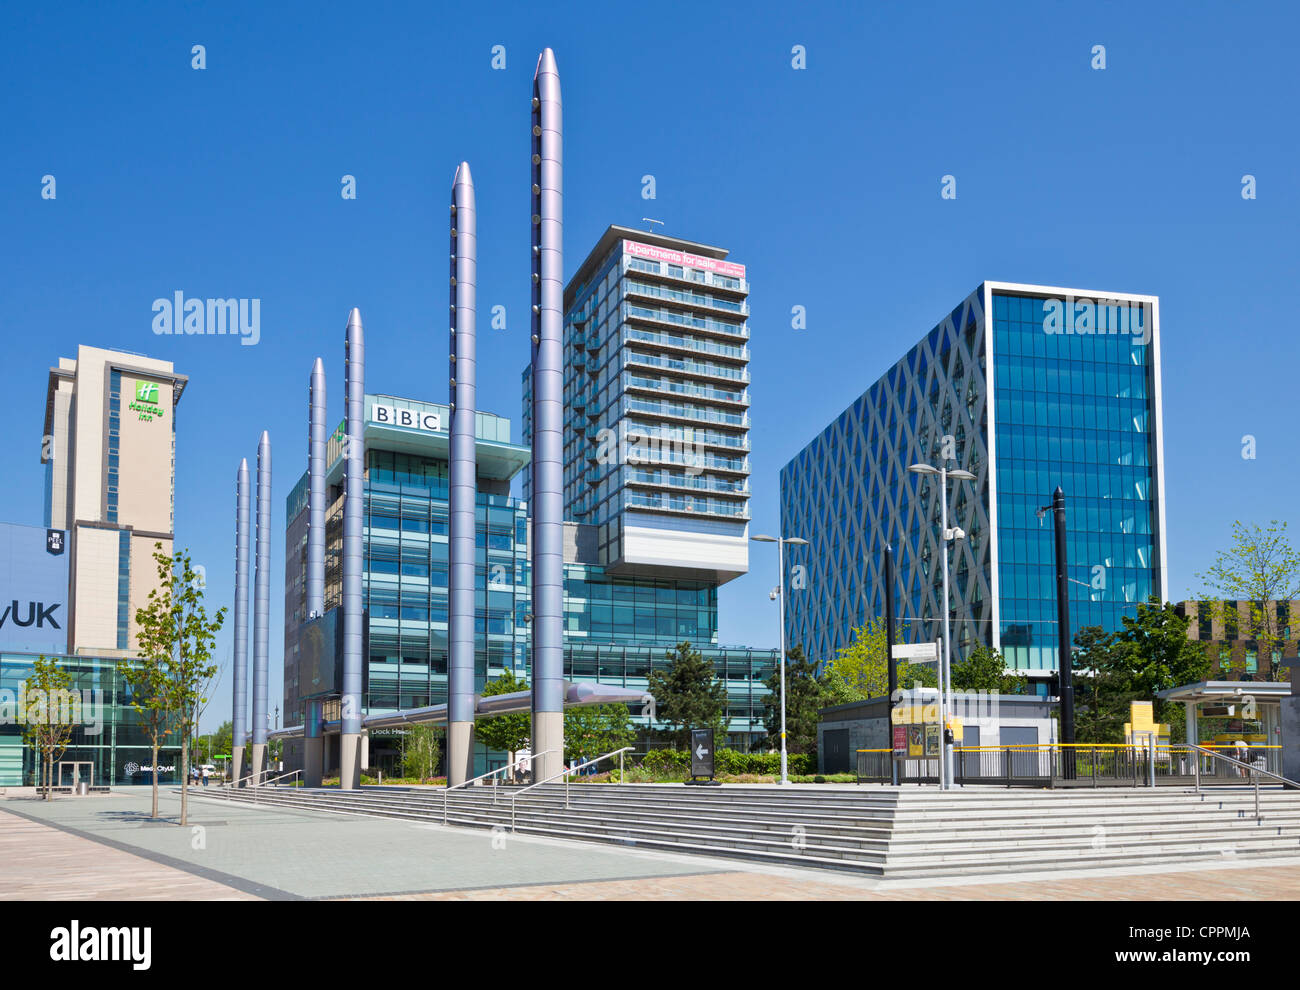 MediaCity UK BBC Television Centre nord Salford Quays manchester Greater Manchester Inghilterra UK GB EU Europe Foto Stock